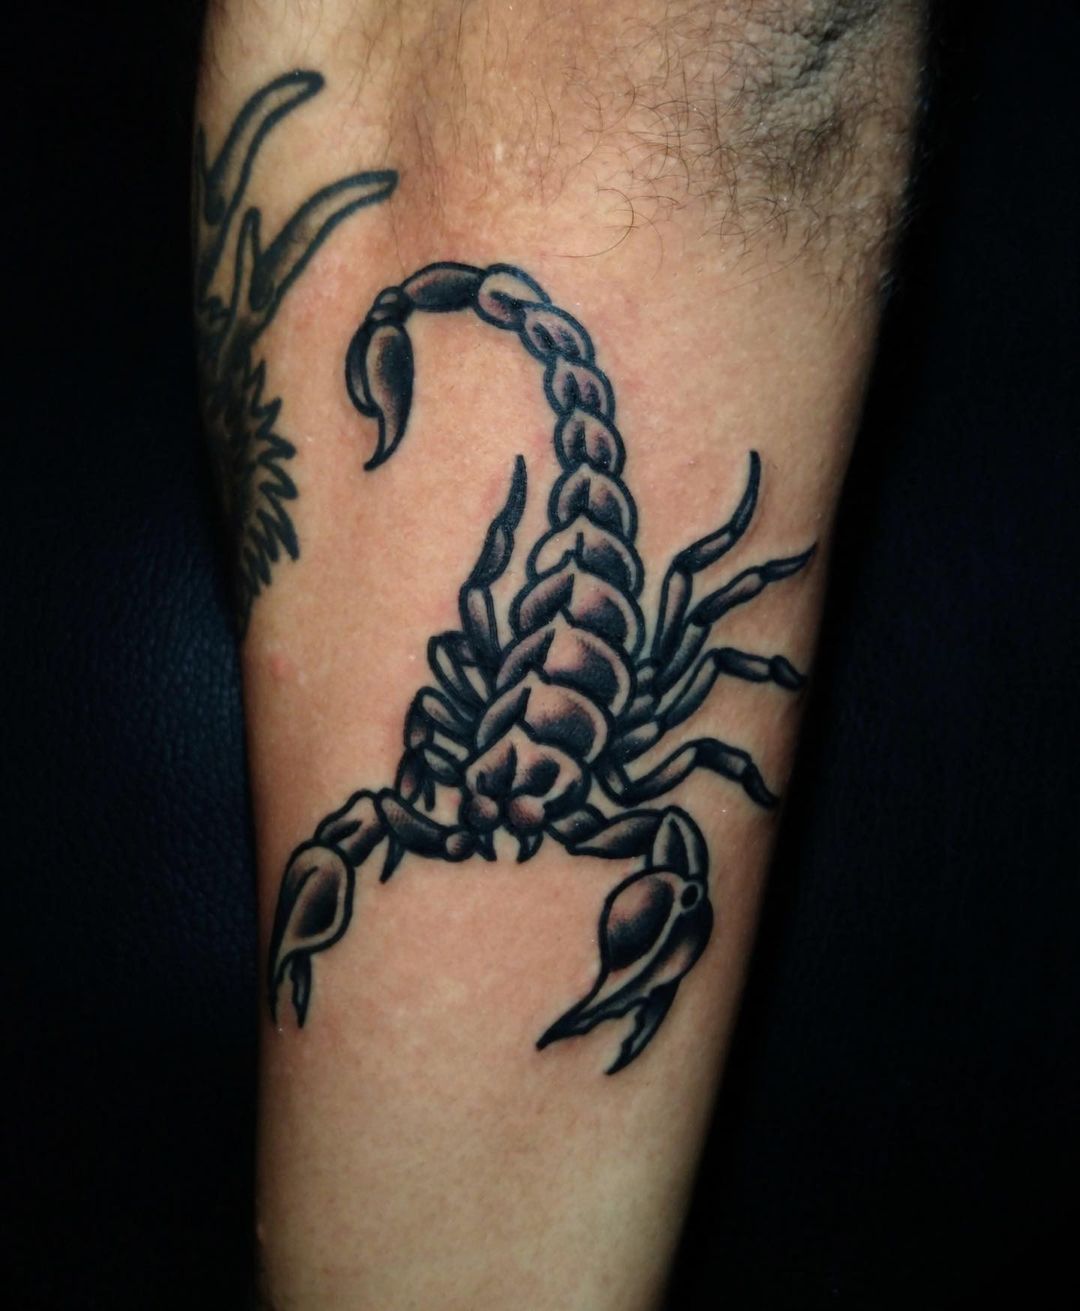 Scorpion Tattoos: The Meaning Behind This Popular Design